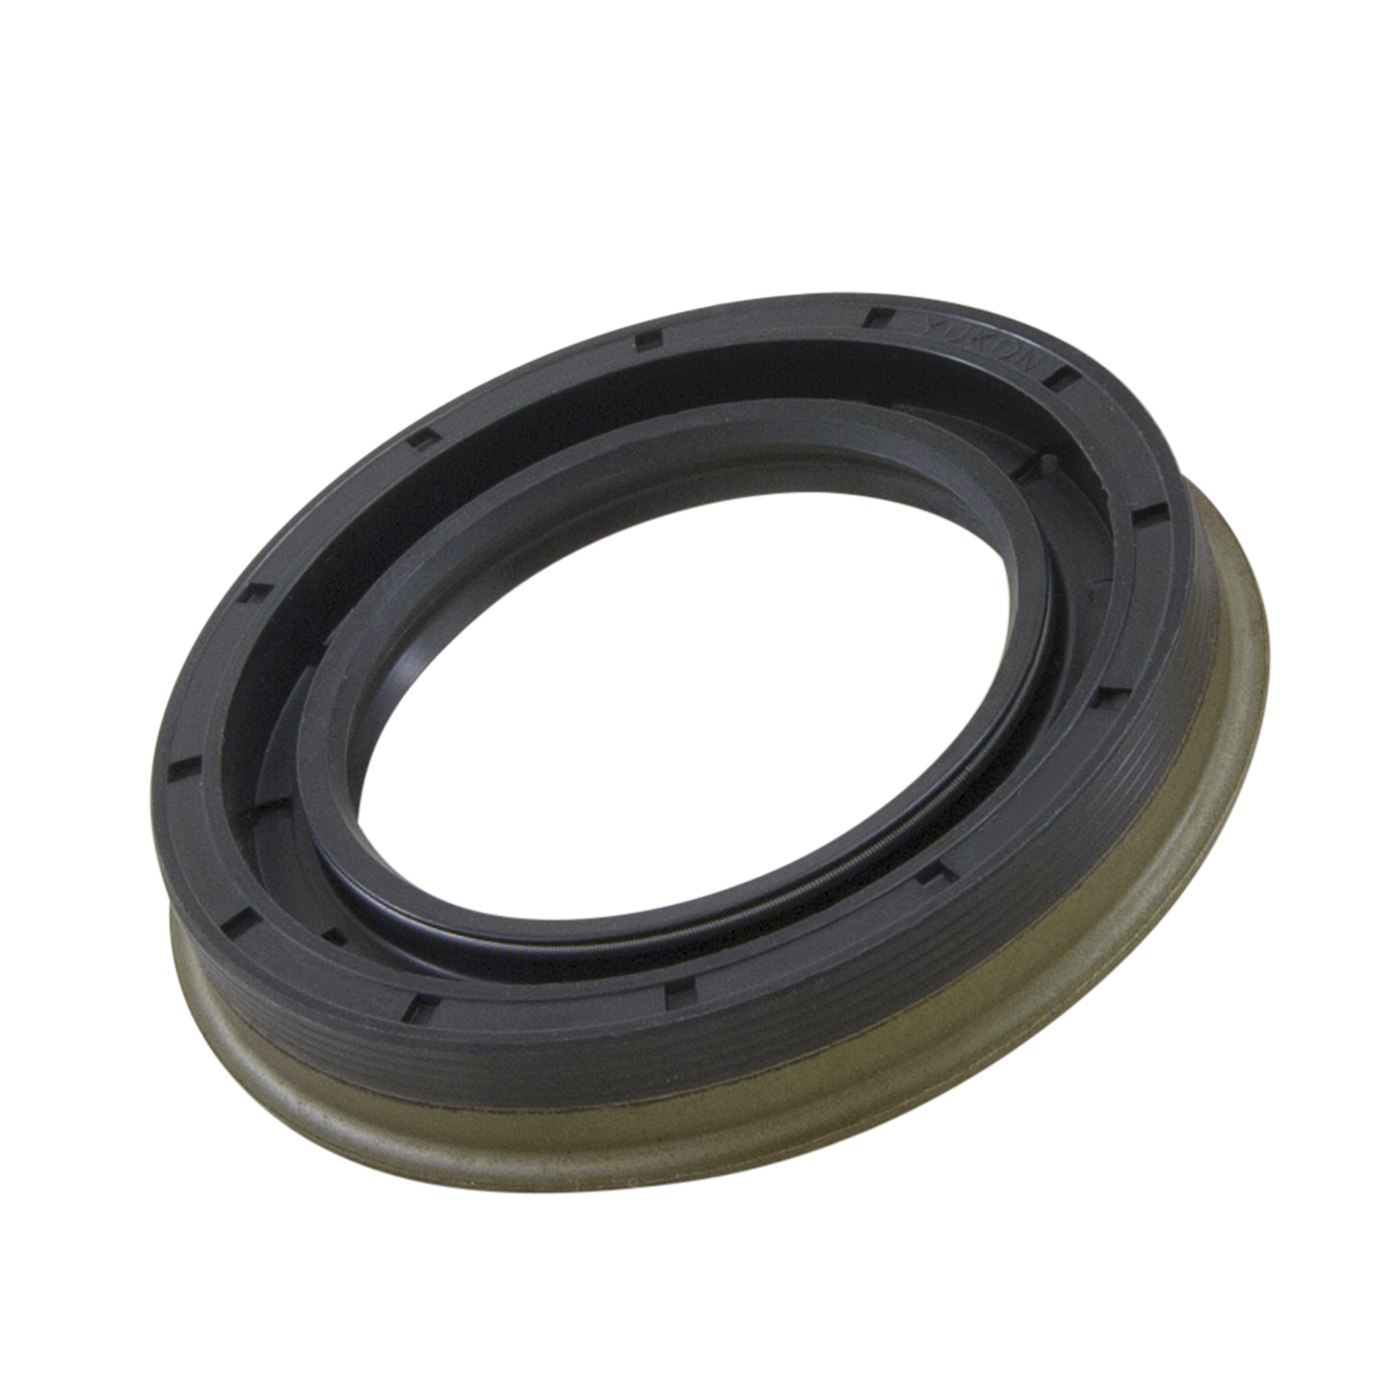 Pinion seal for GM 9.25" IFS 